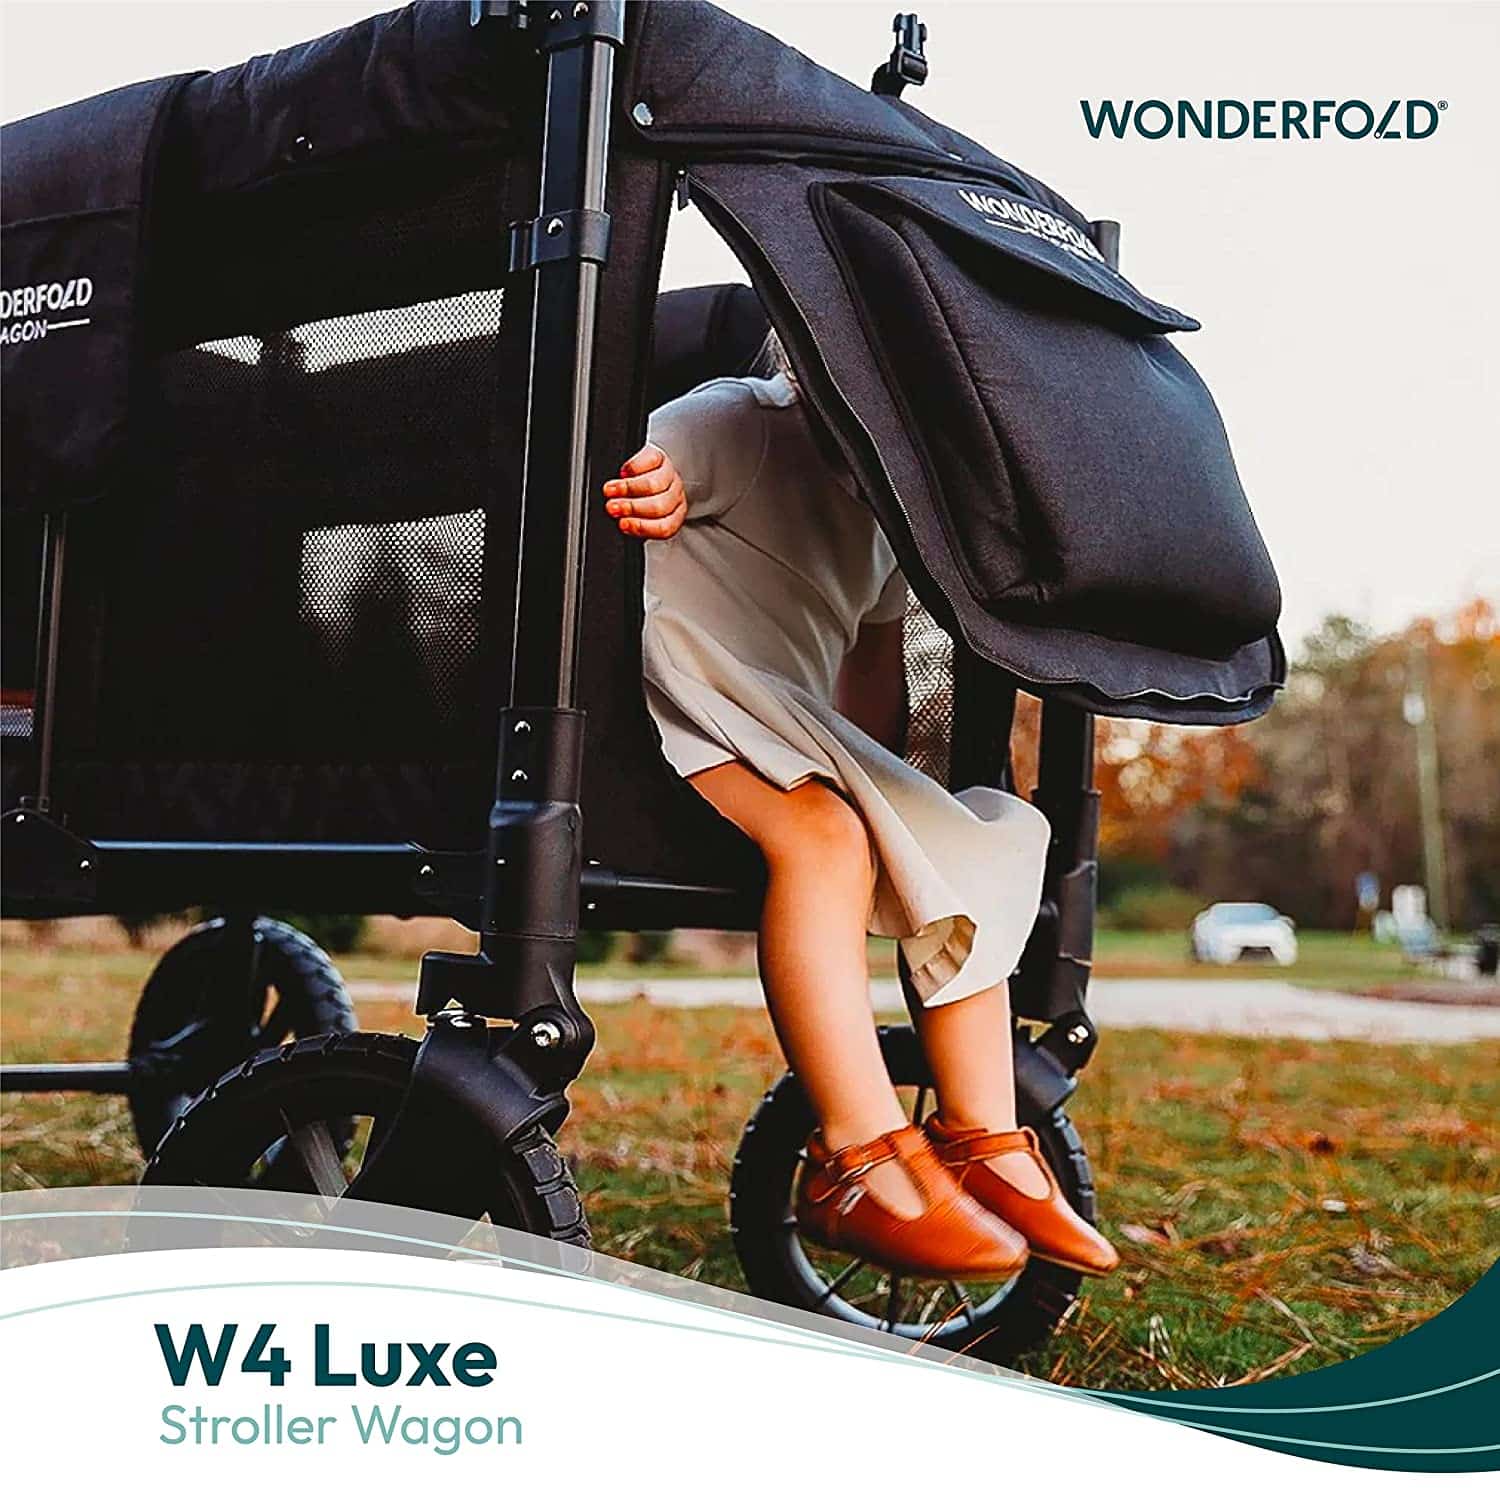 Wonderfold Wagon: A Review of its Design, Features, and Functionality  – December 2023